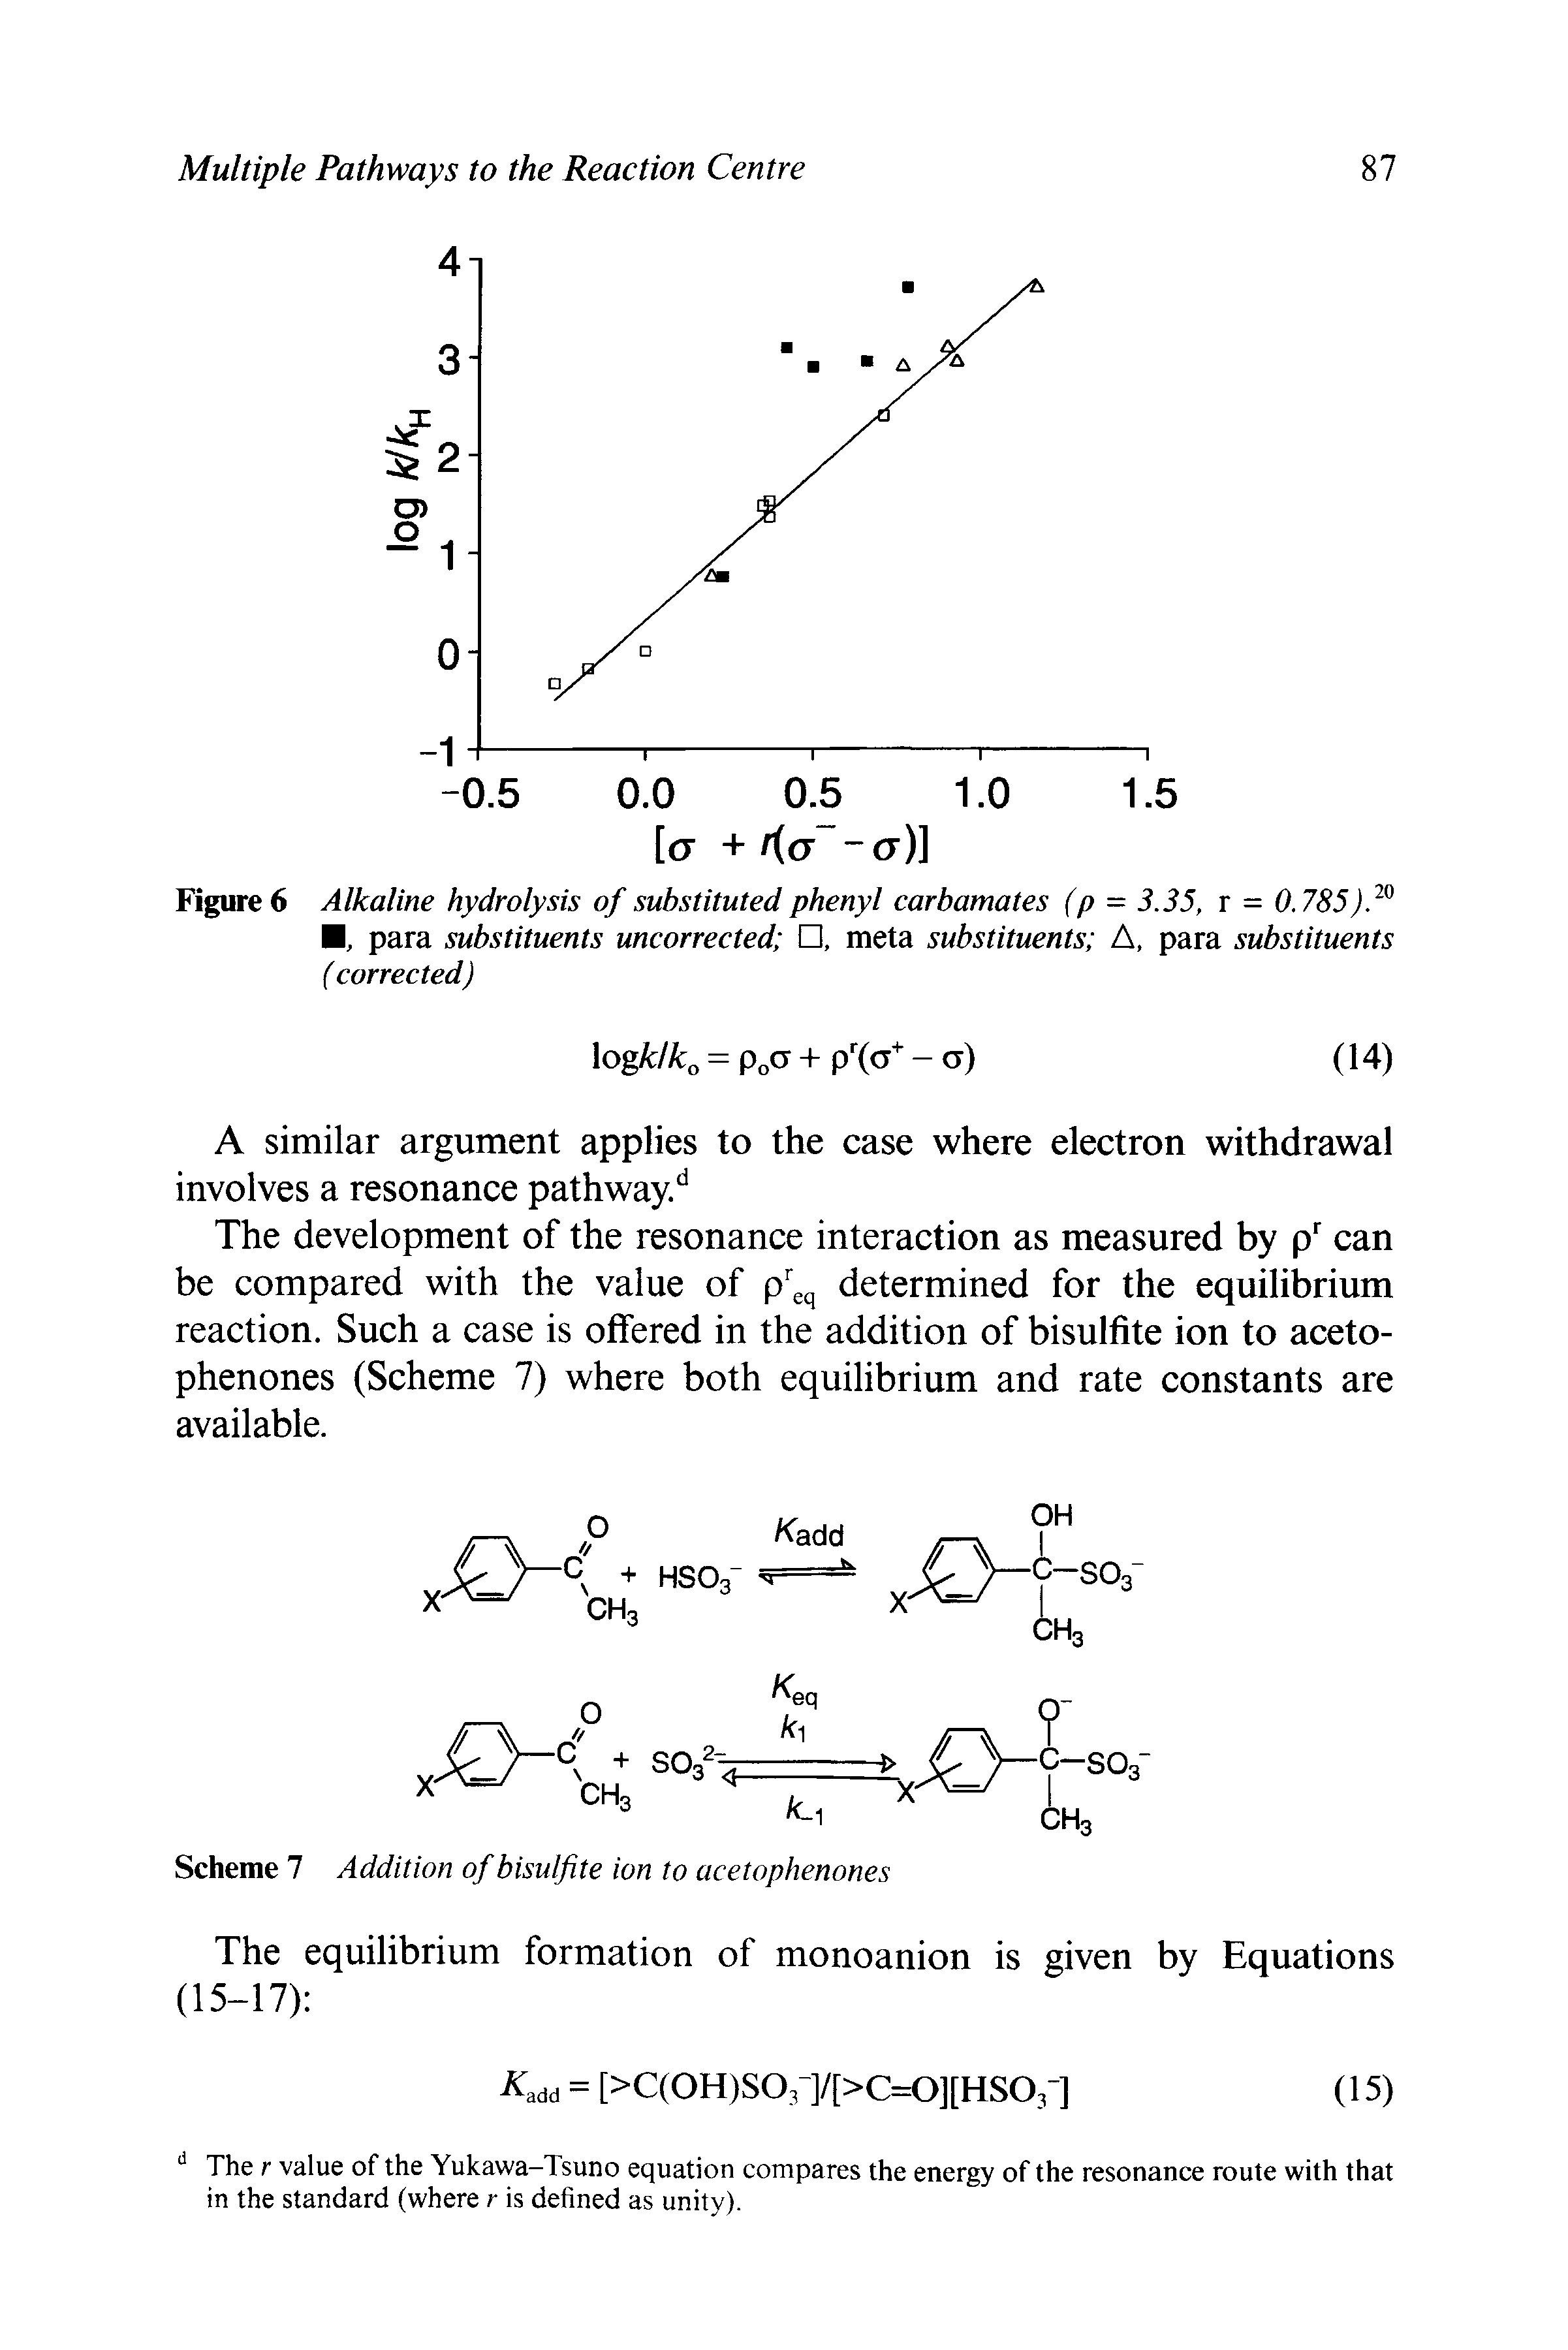 Figure 6 Alkaline hydrolysis of substituted phenyl carbamates (p = 3.35, r = 0.785). para substituents uncorrected , meta substituents /5., para substituents...